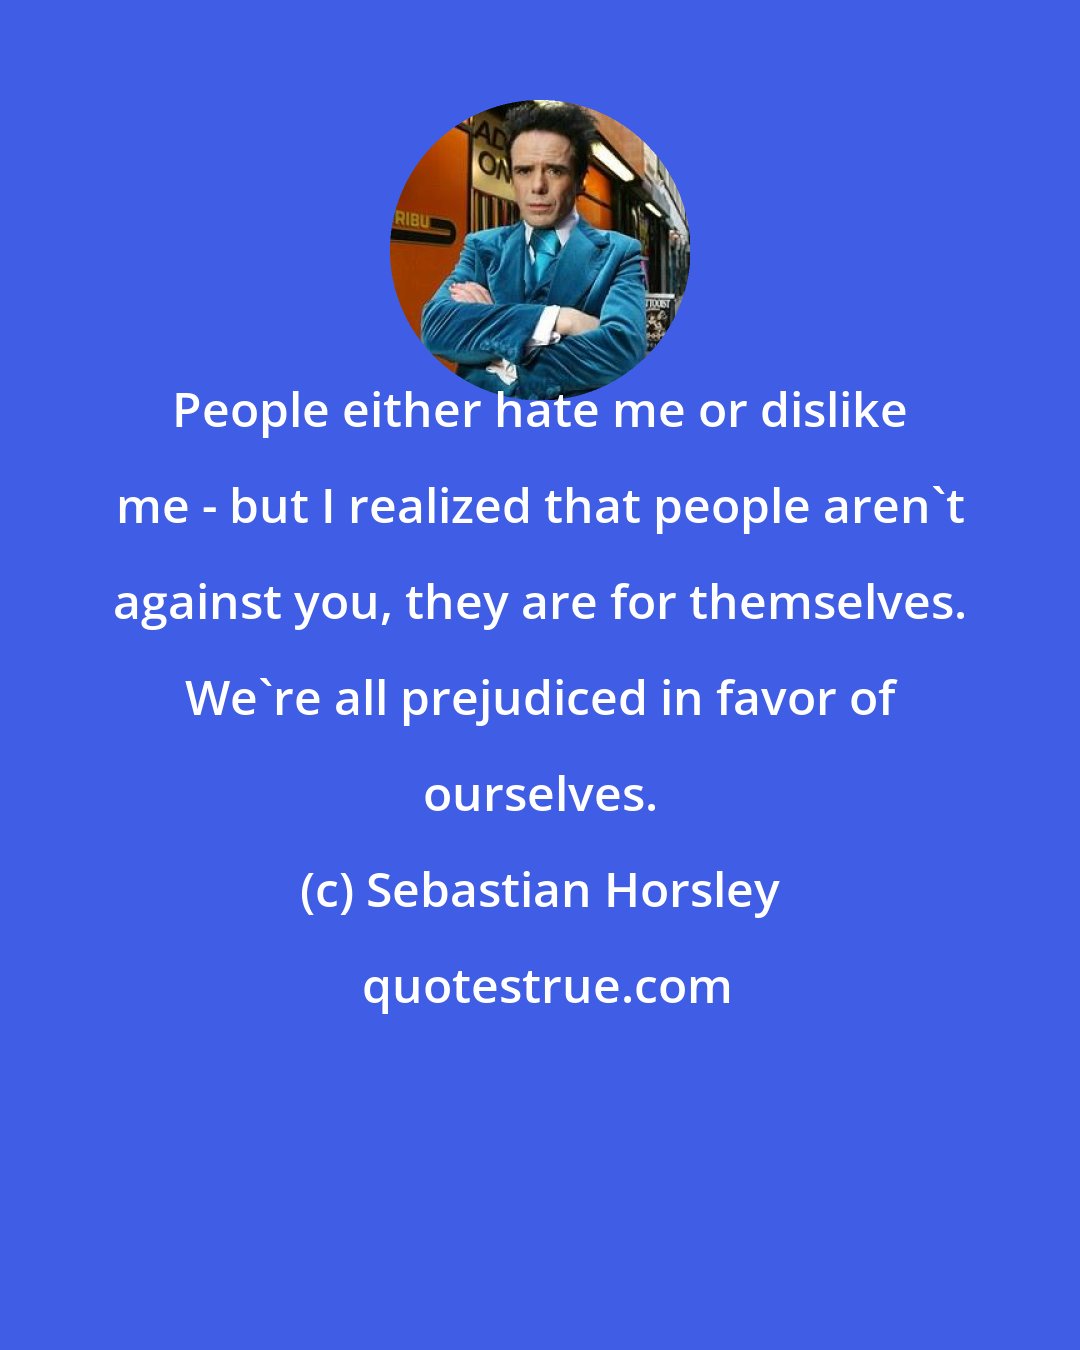 Sebastian Horsley: People either hate me or dislike me - but I realized that people aren't against you, they are for themselves. We're all prejudiced in favor of ourselves.